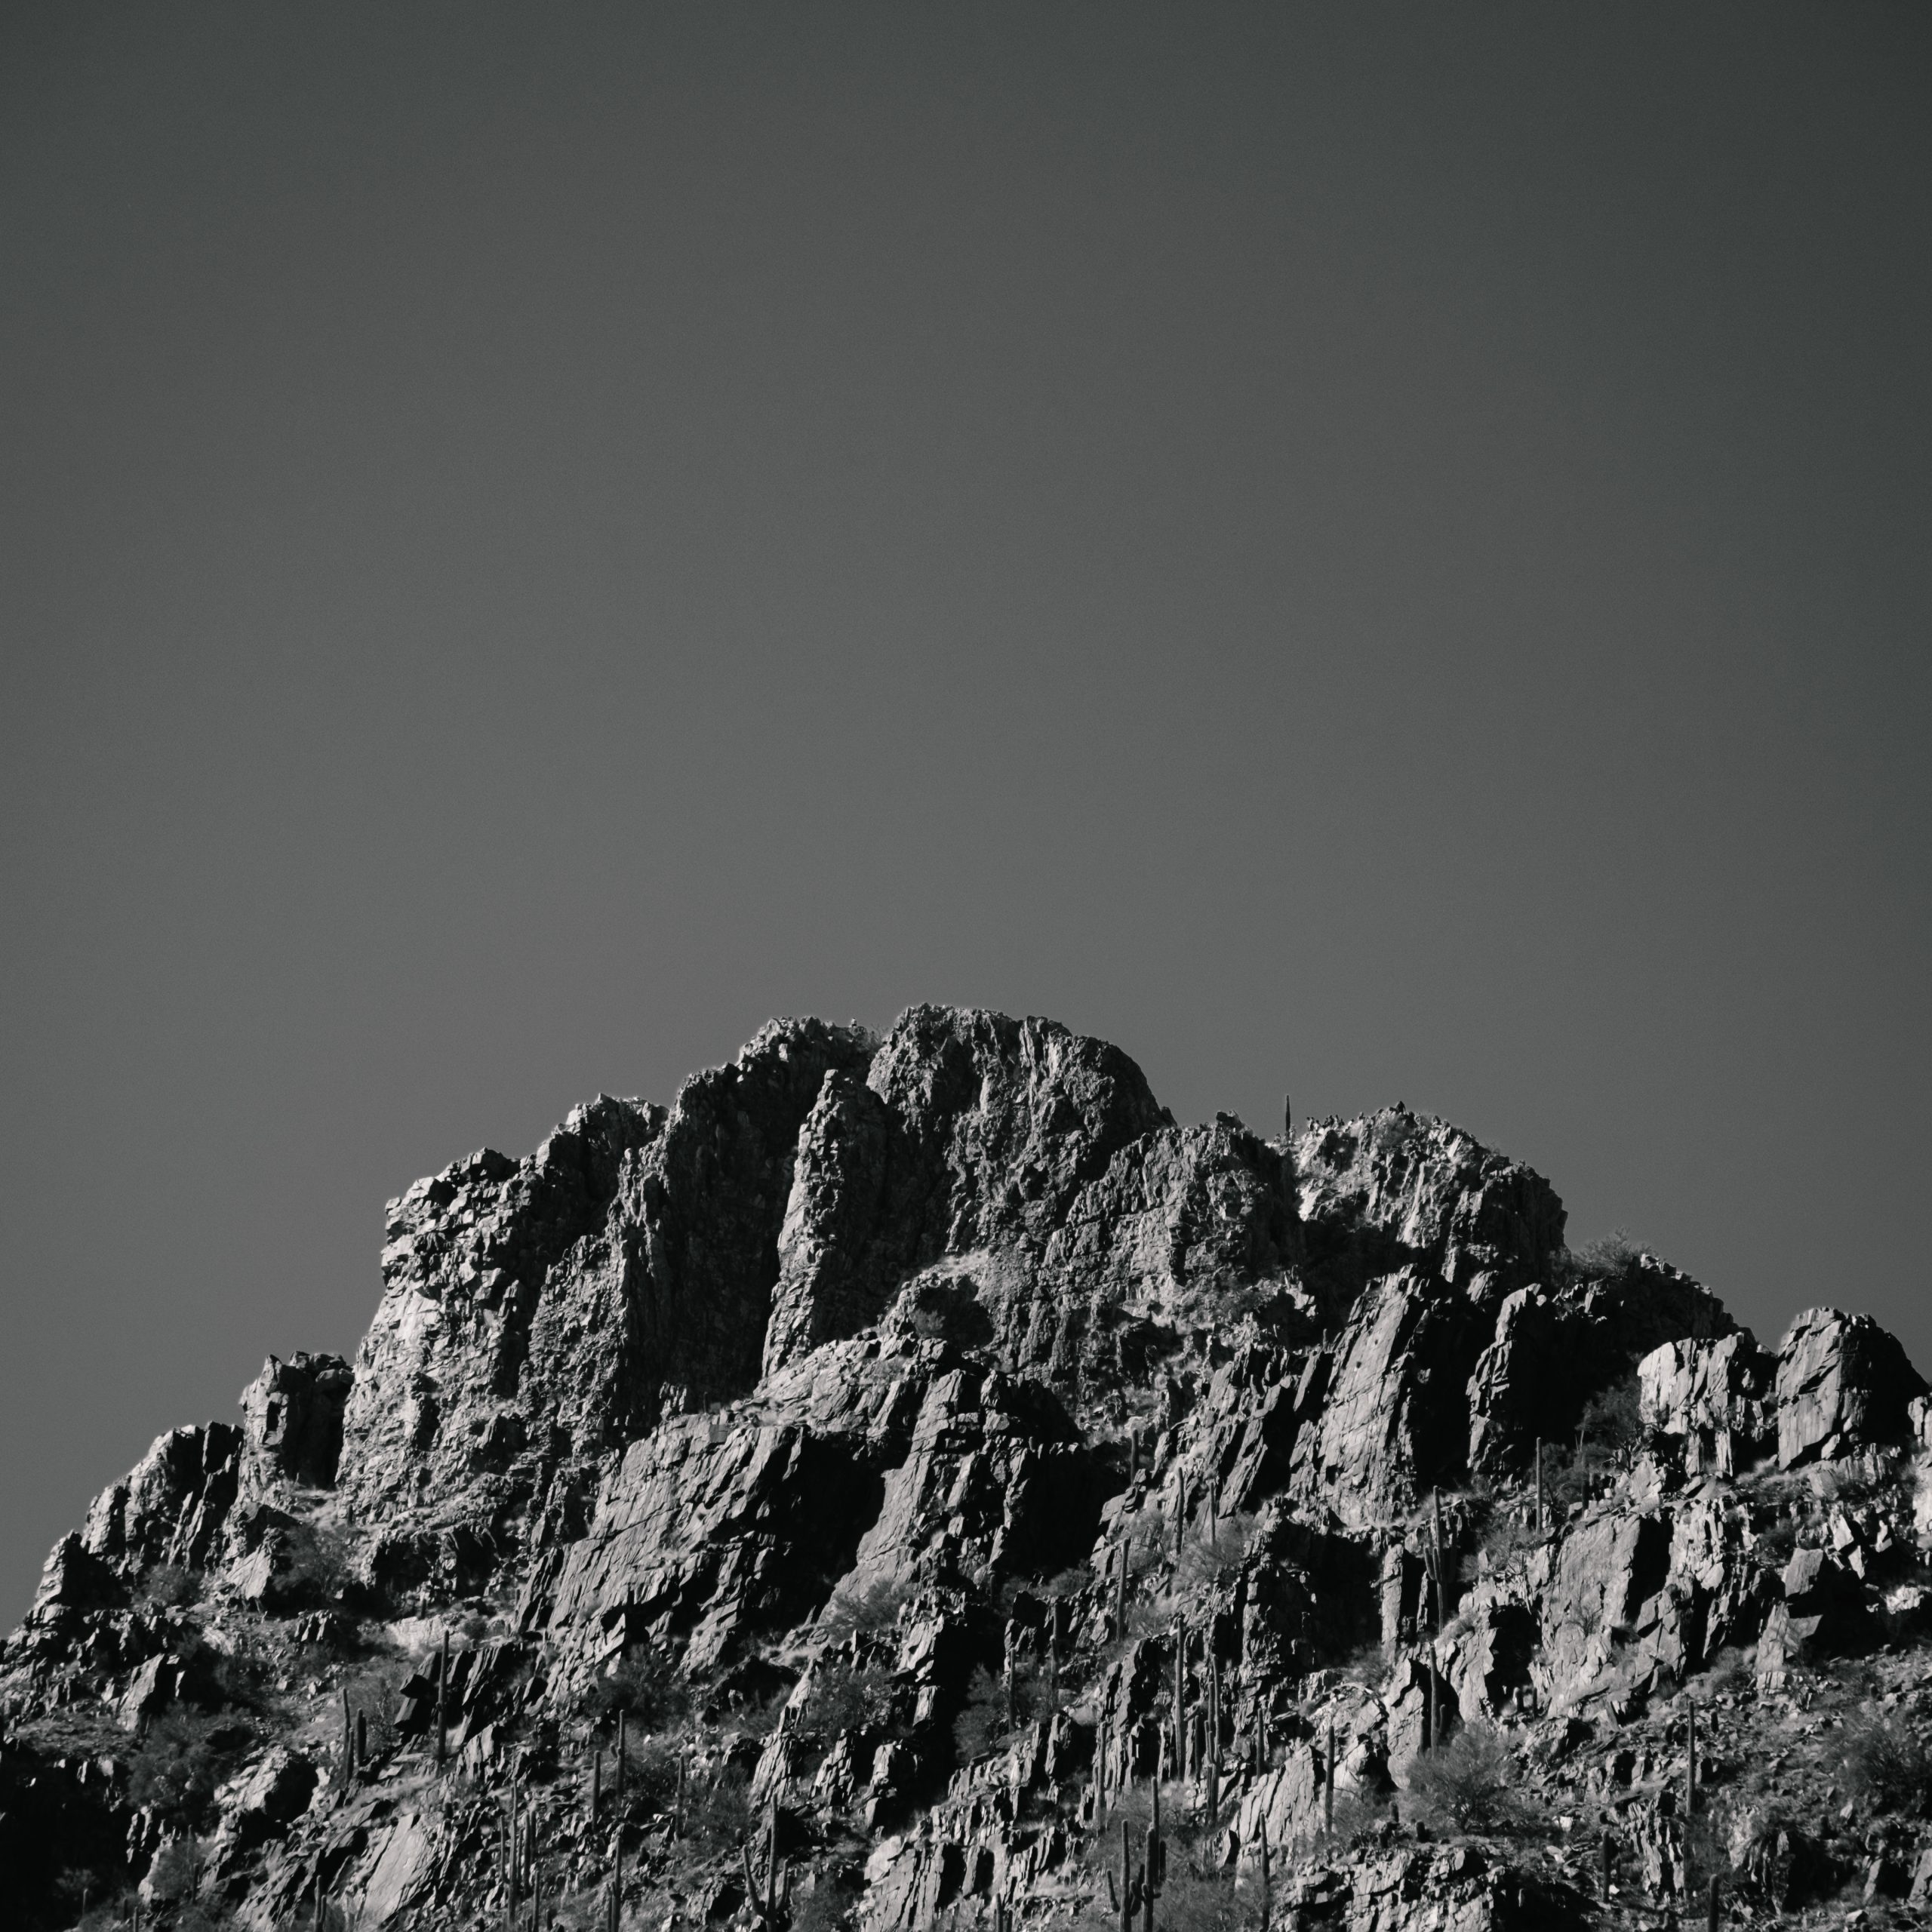 Black and white photograph of the top of a rocky outcrop of a mountain.